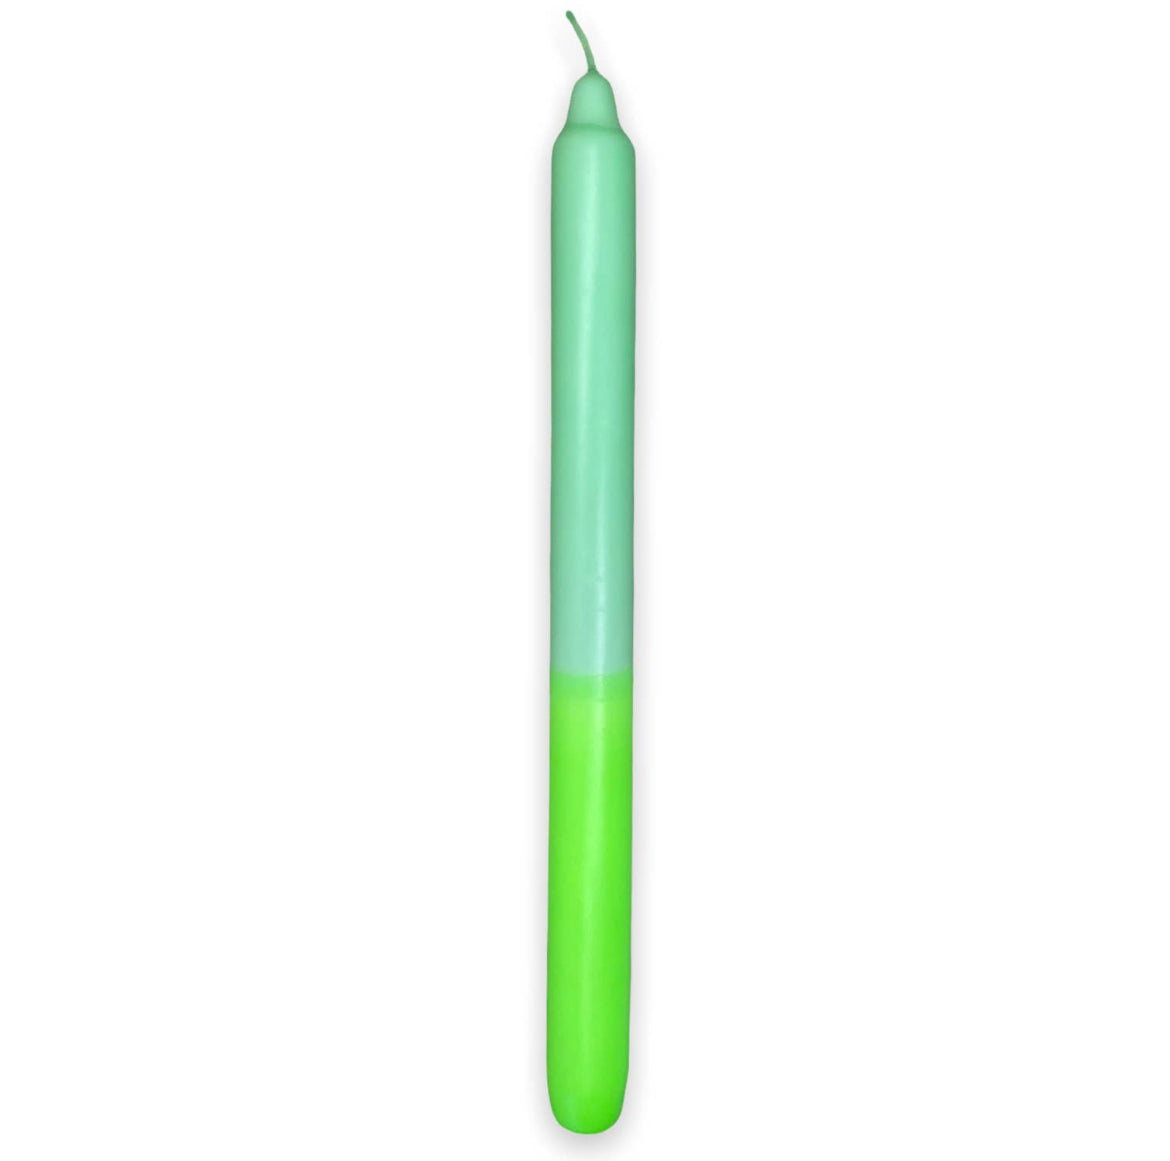 Dipdye Stick Candle 29cm Neon Green And Mint